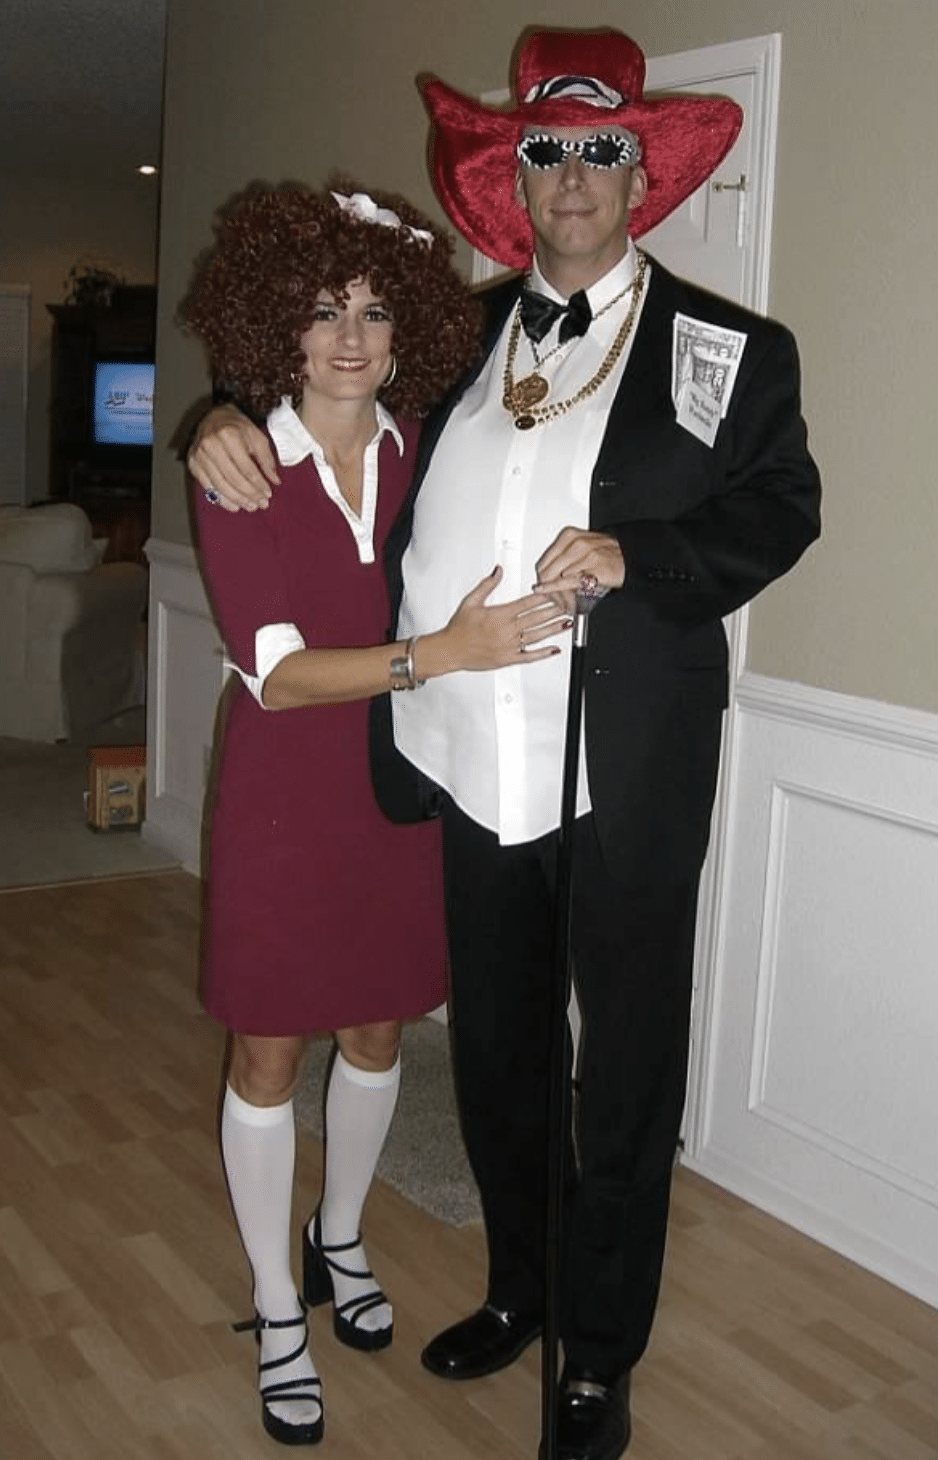 Man and woman dressed like a pimp Daddy Warbucks and a prostitute Annie